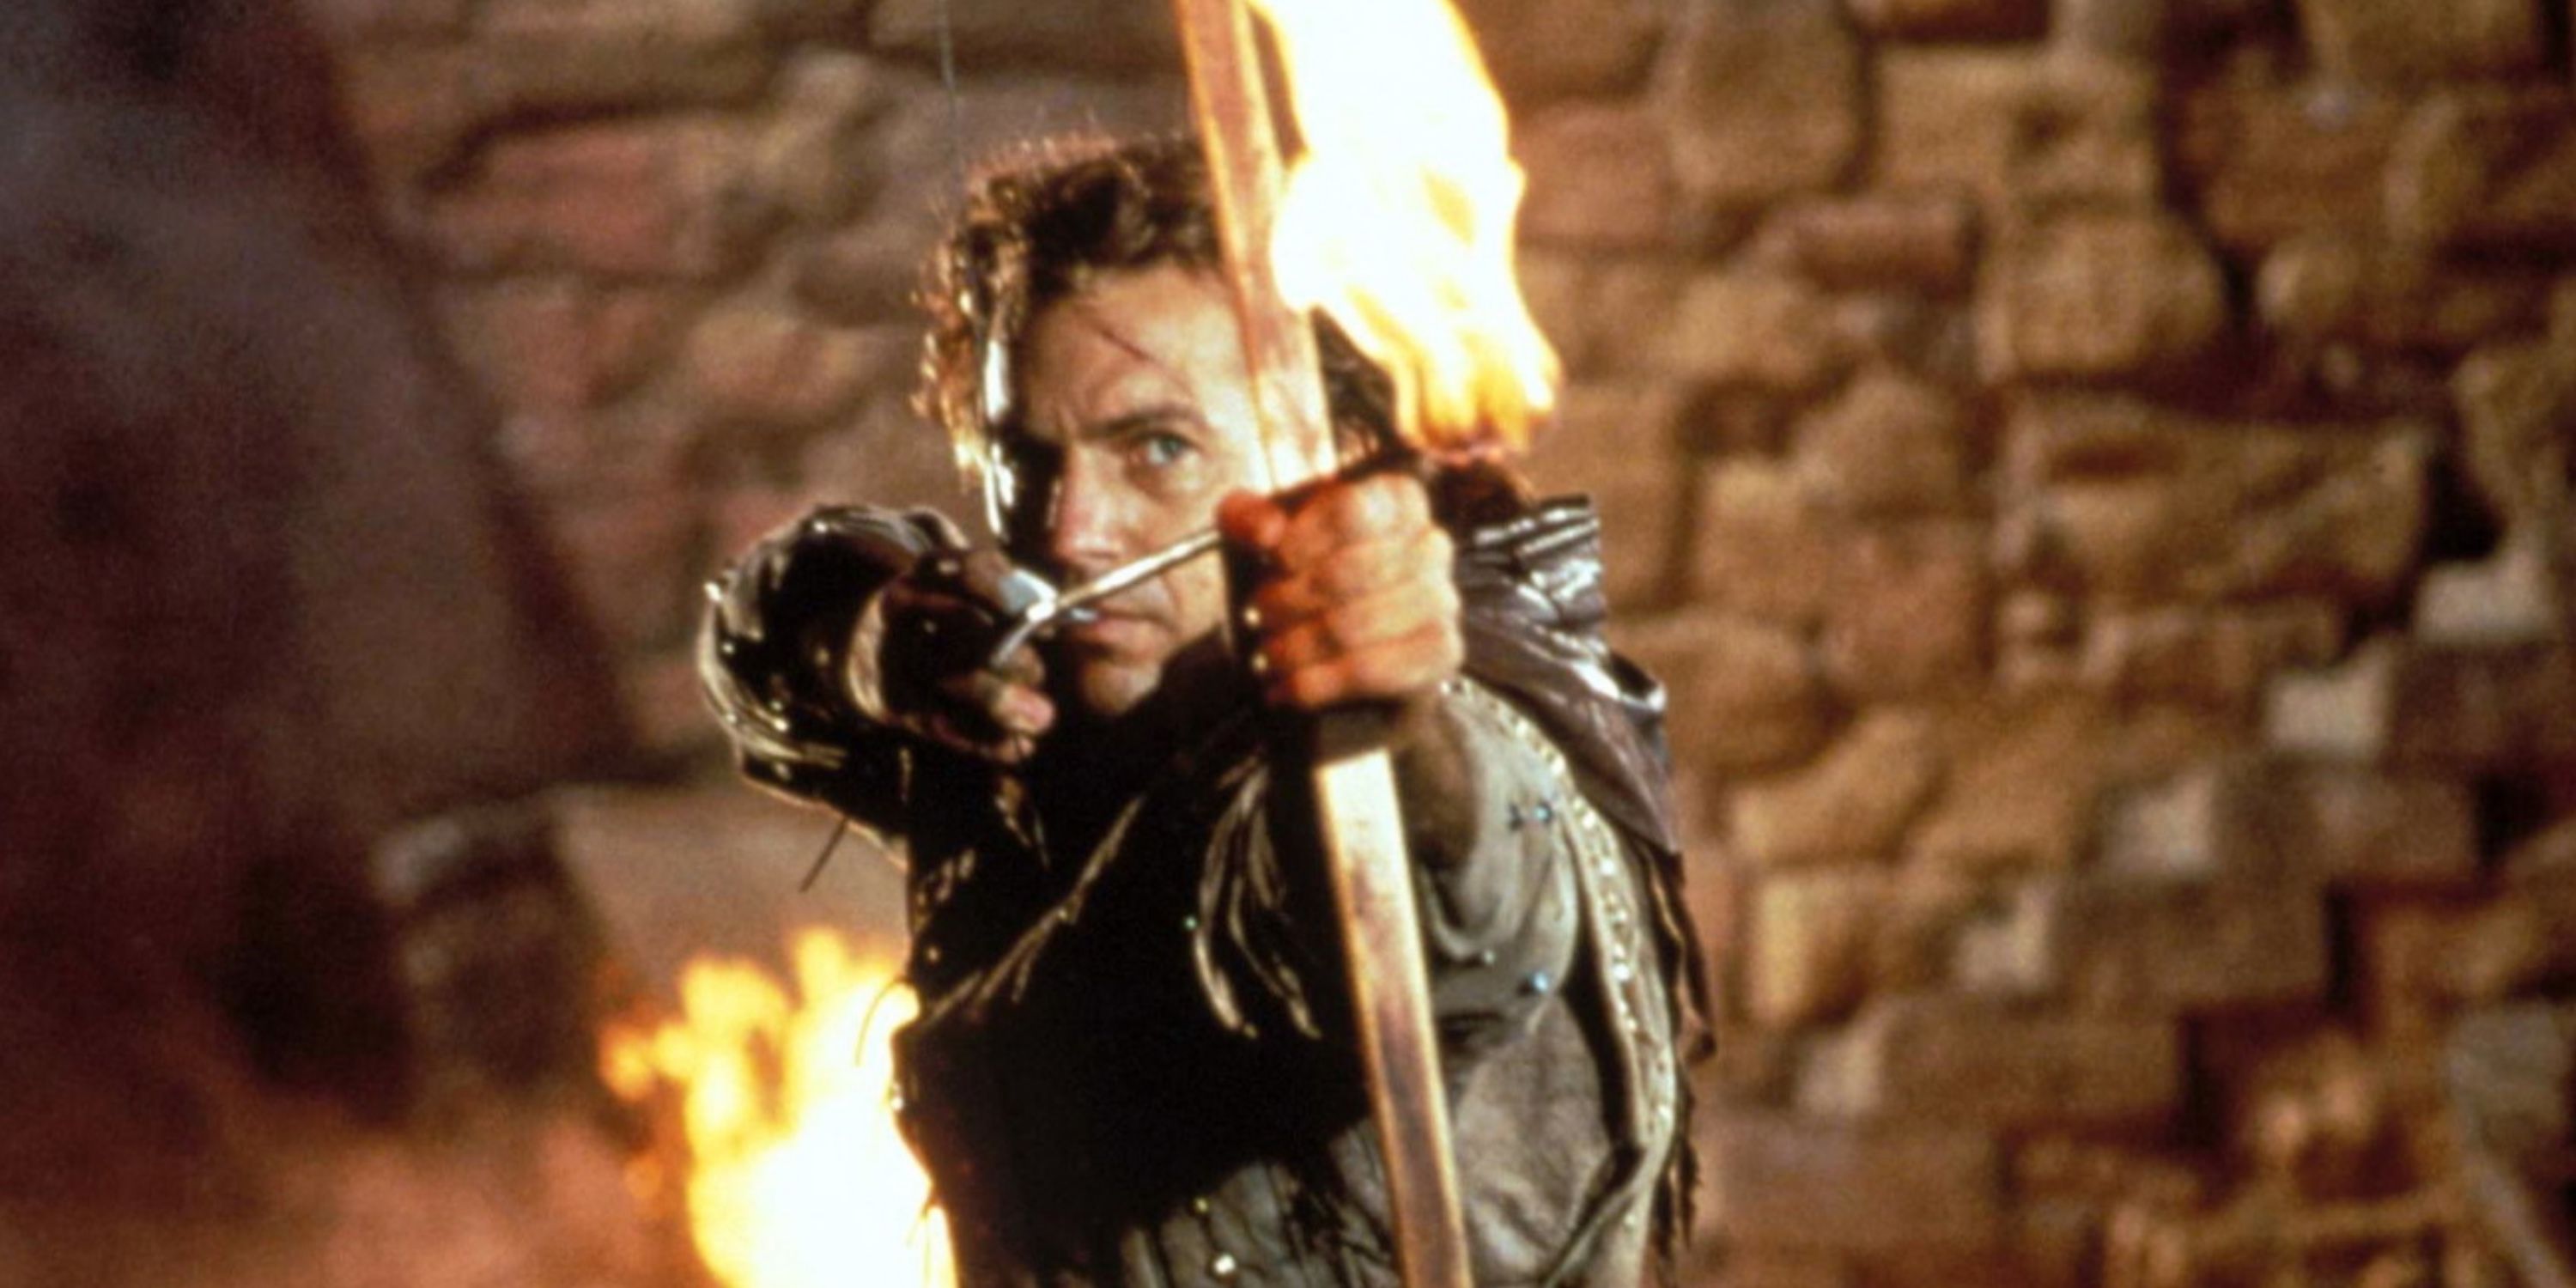 Robin Hood 'Robin Hood: Prince of Thieves' portrayed by Kevin Costner